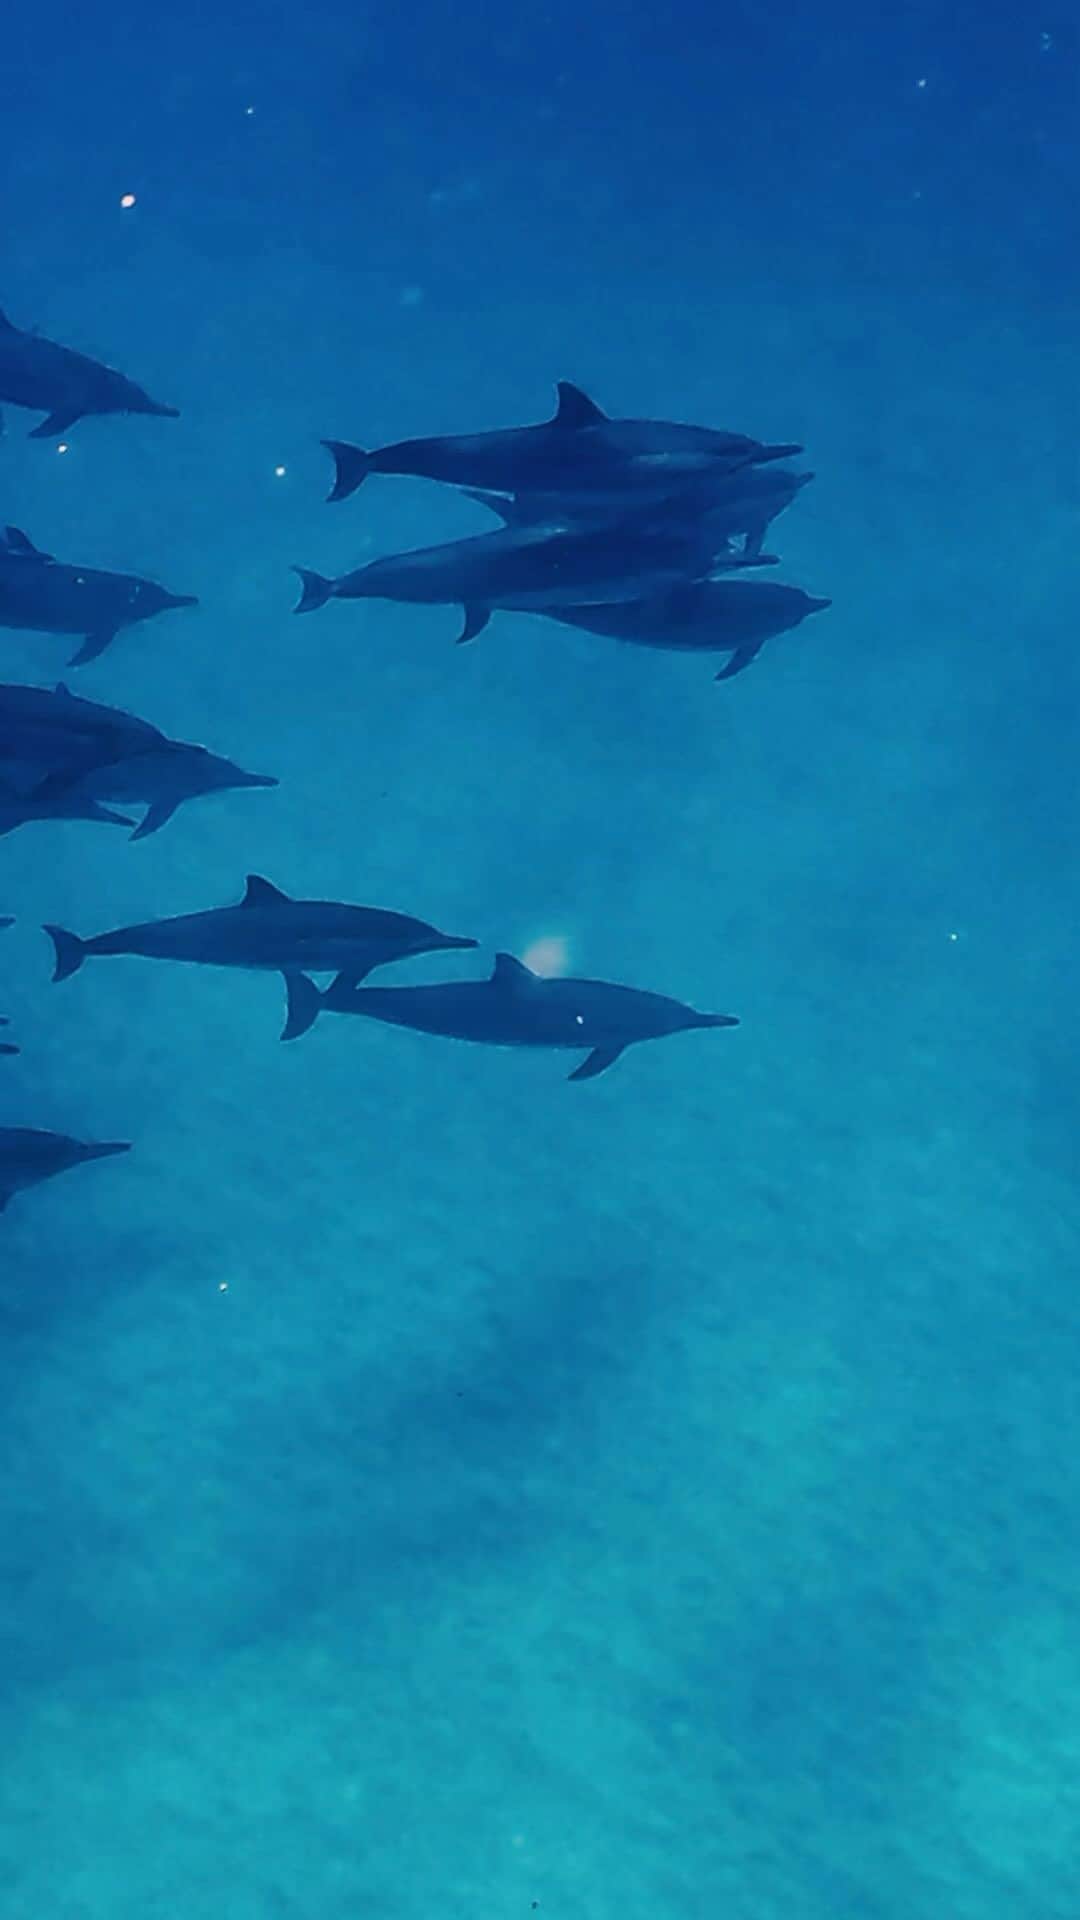 And Youのインスタグラム：「This beautiful spinner dolphin is an example of the power and freedom of nature! Witnessing it break away from its pod and swim to the surface fills us with awe and admiration. 🐬 🐋 🐬  #ParadiseOnEarth #HawaiiVibes #ExploreHawaii #DolphinsOfHawaii #DolphinLove #SpinnerDolphin #MagicalMoments #HawaiiLife #DolphinSanctuary #GracefulDolphins #BlueHeaven #HawaiiIslandVibes #OceanBlessings #HawaiiIslandLife #dolphinsandyou #oahutours #luckywelivehawaii」